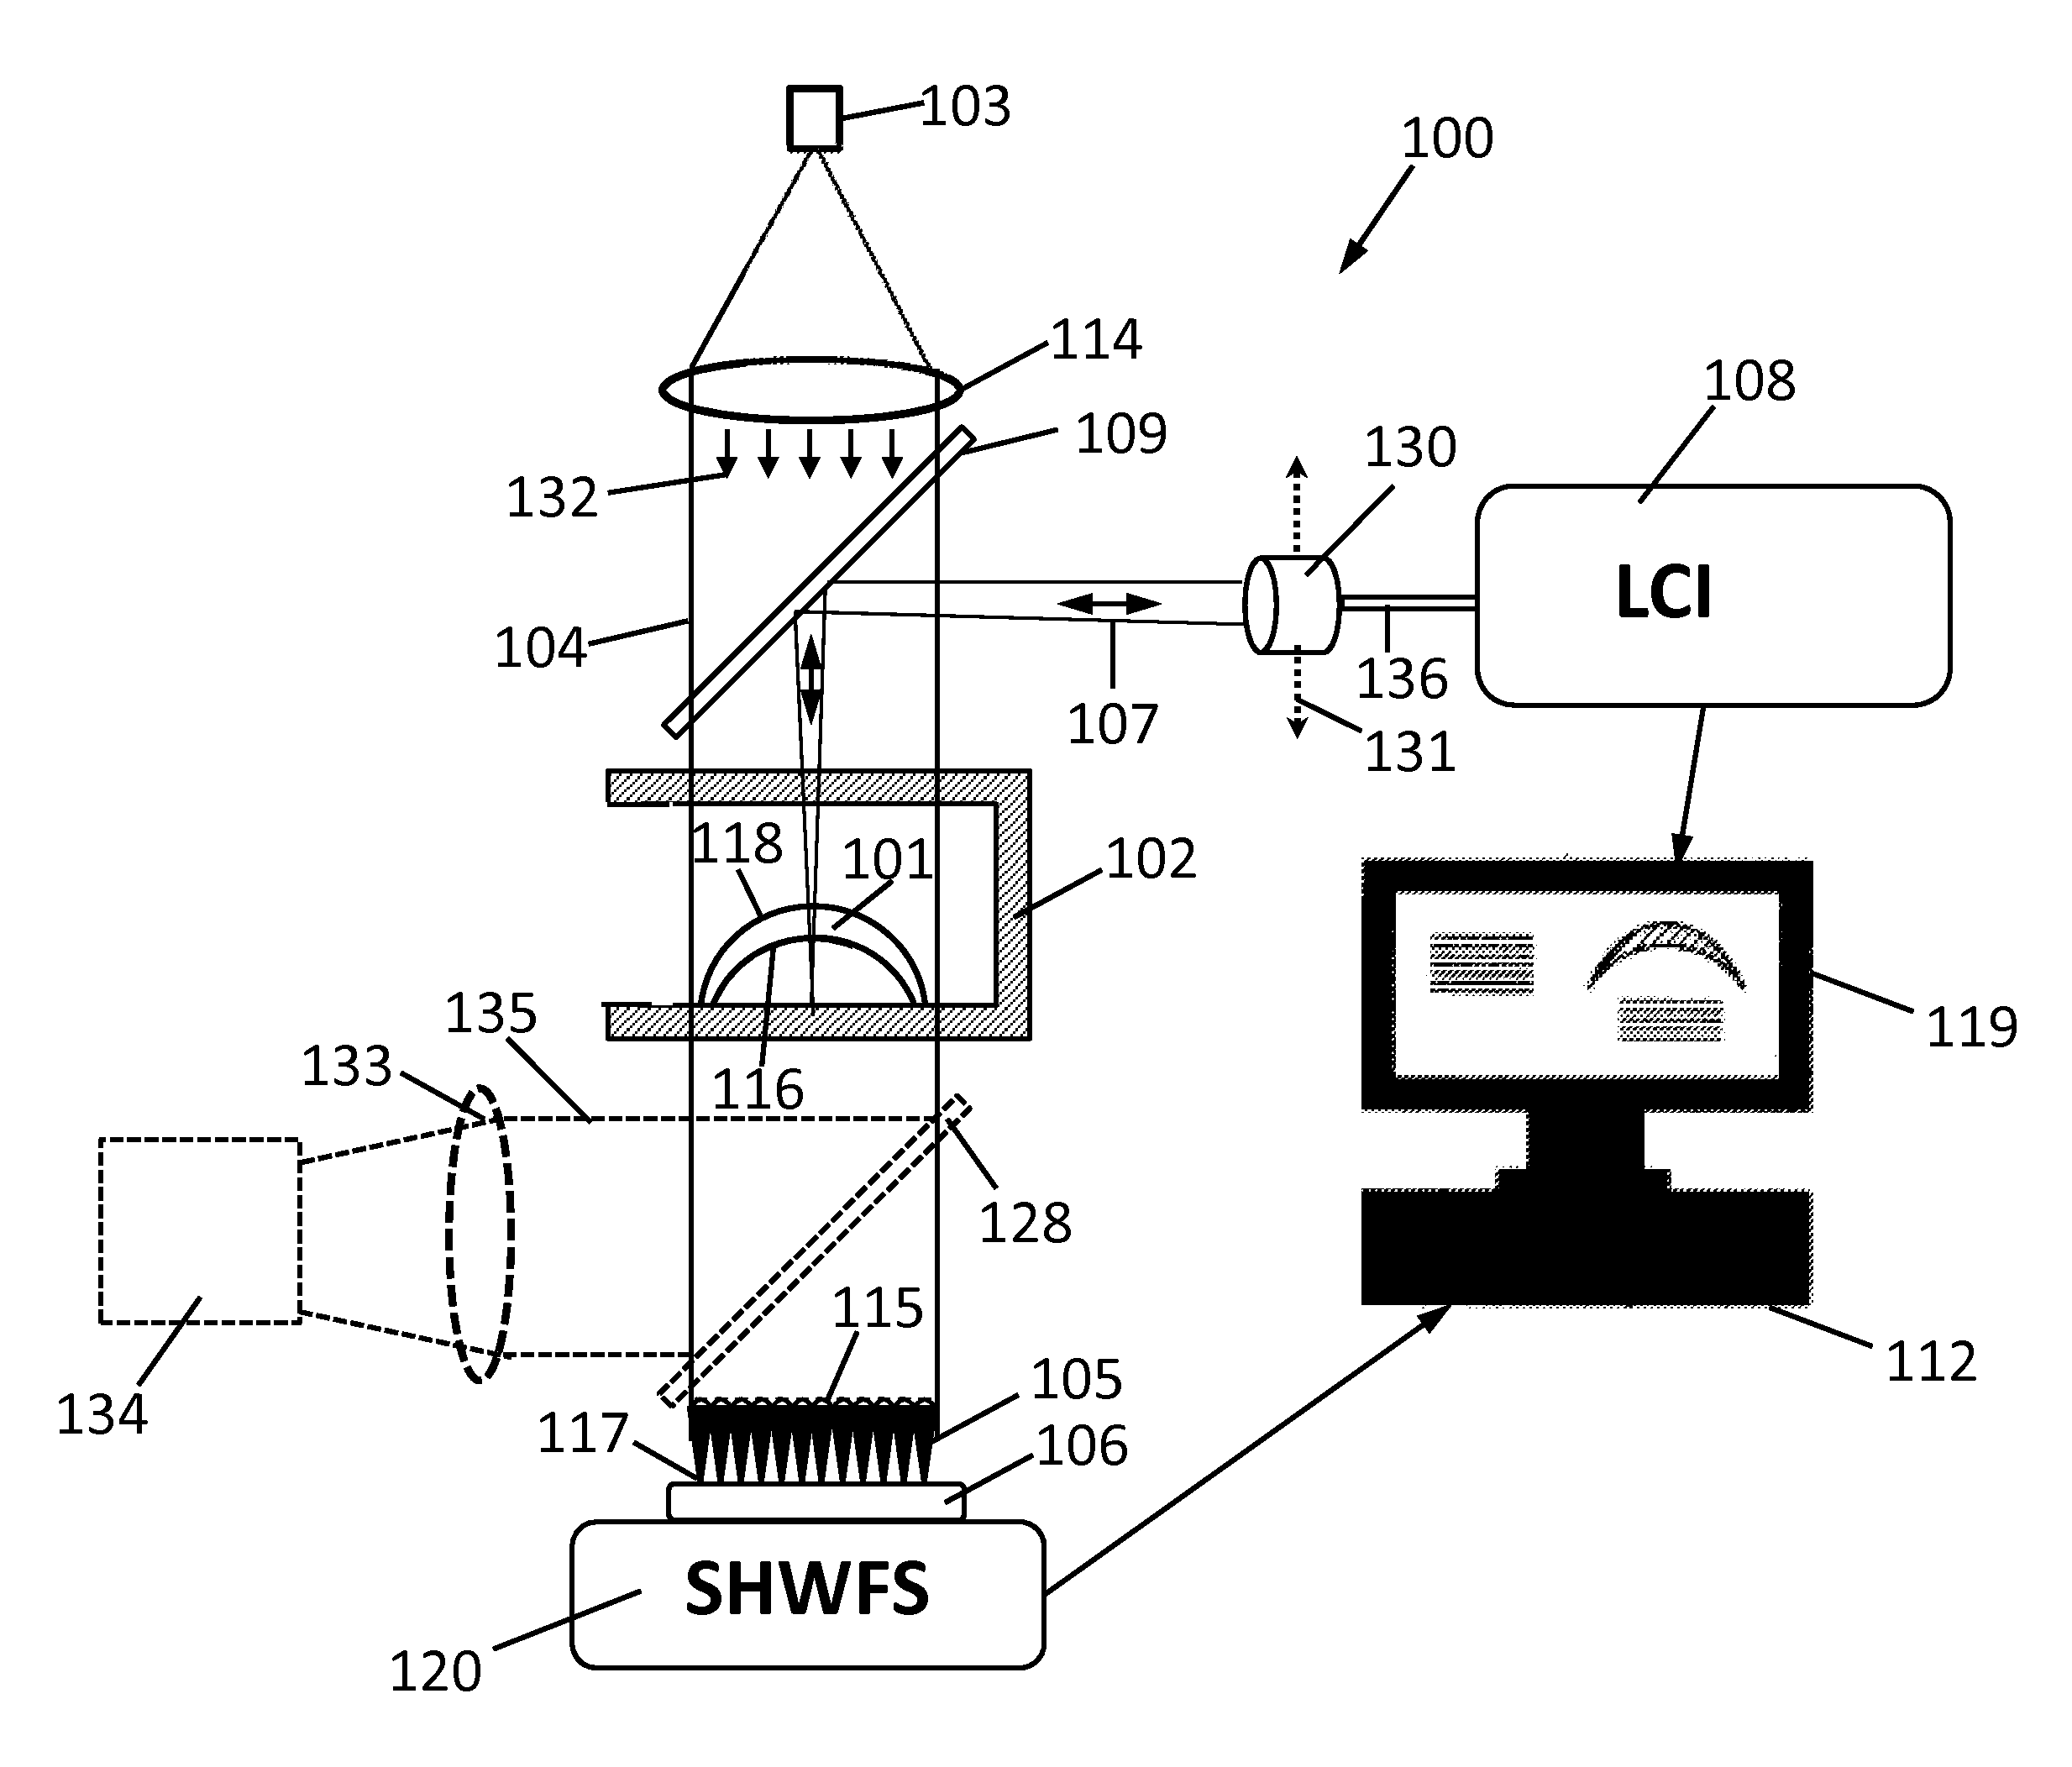 Apparatus and method for evaluation of optical elements